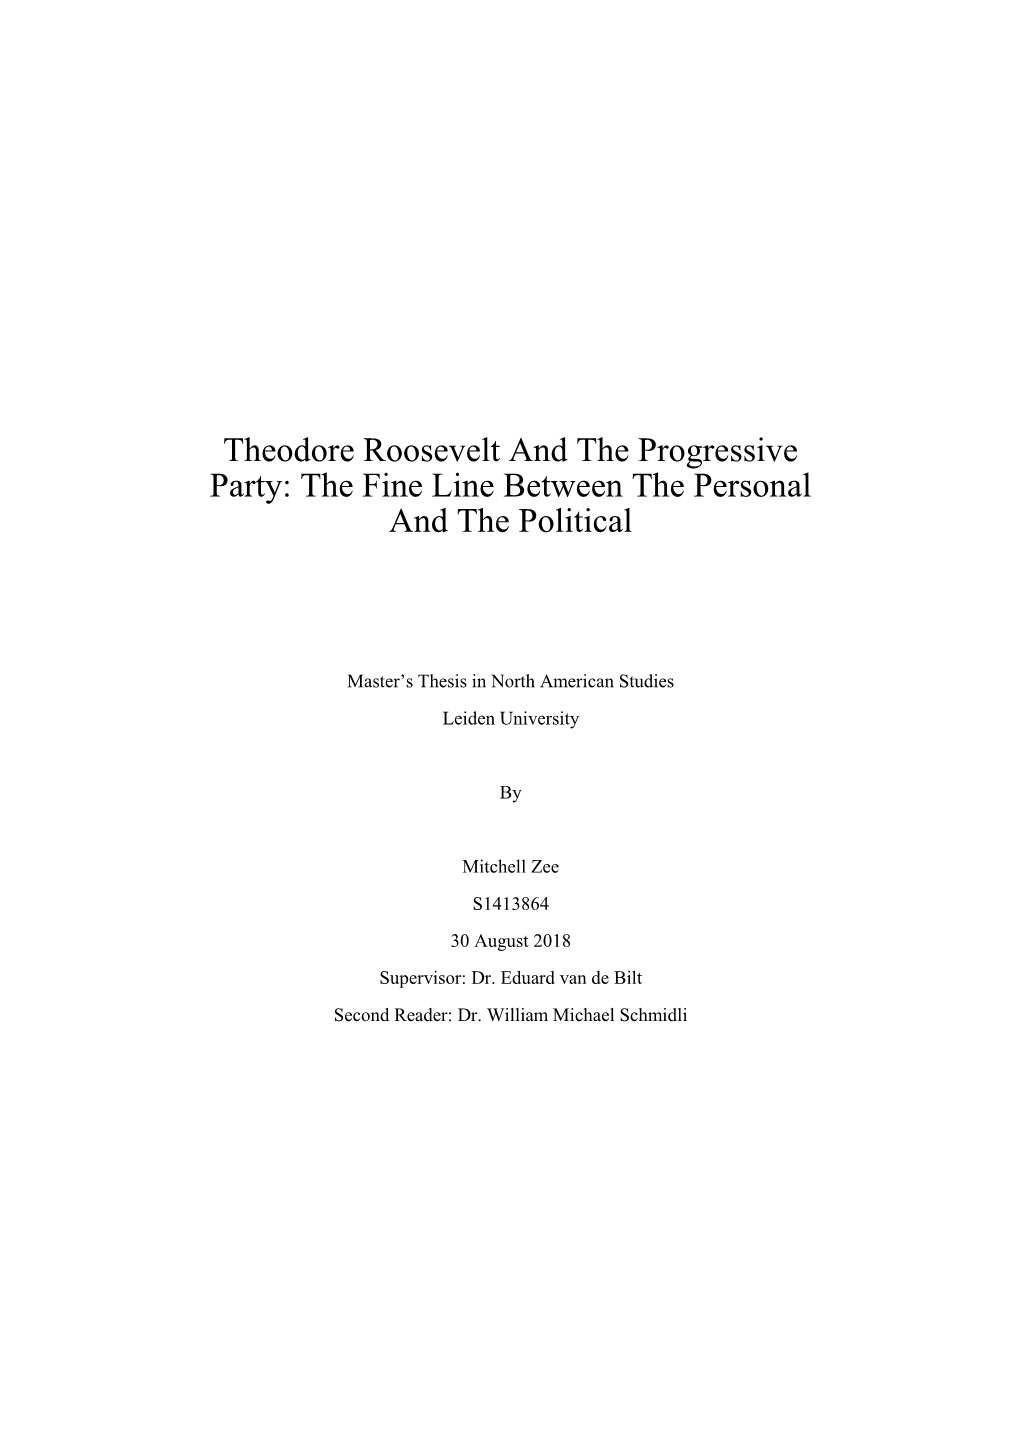 Theodore Roosevelt and the Progressive Party: the Fine Line Between the Personal and the Political